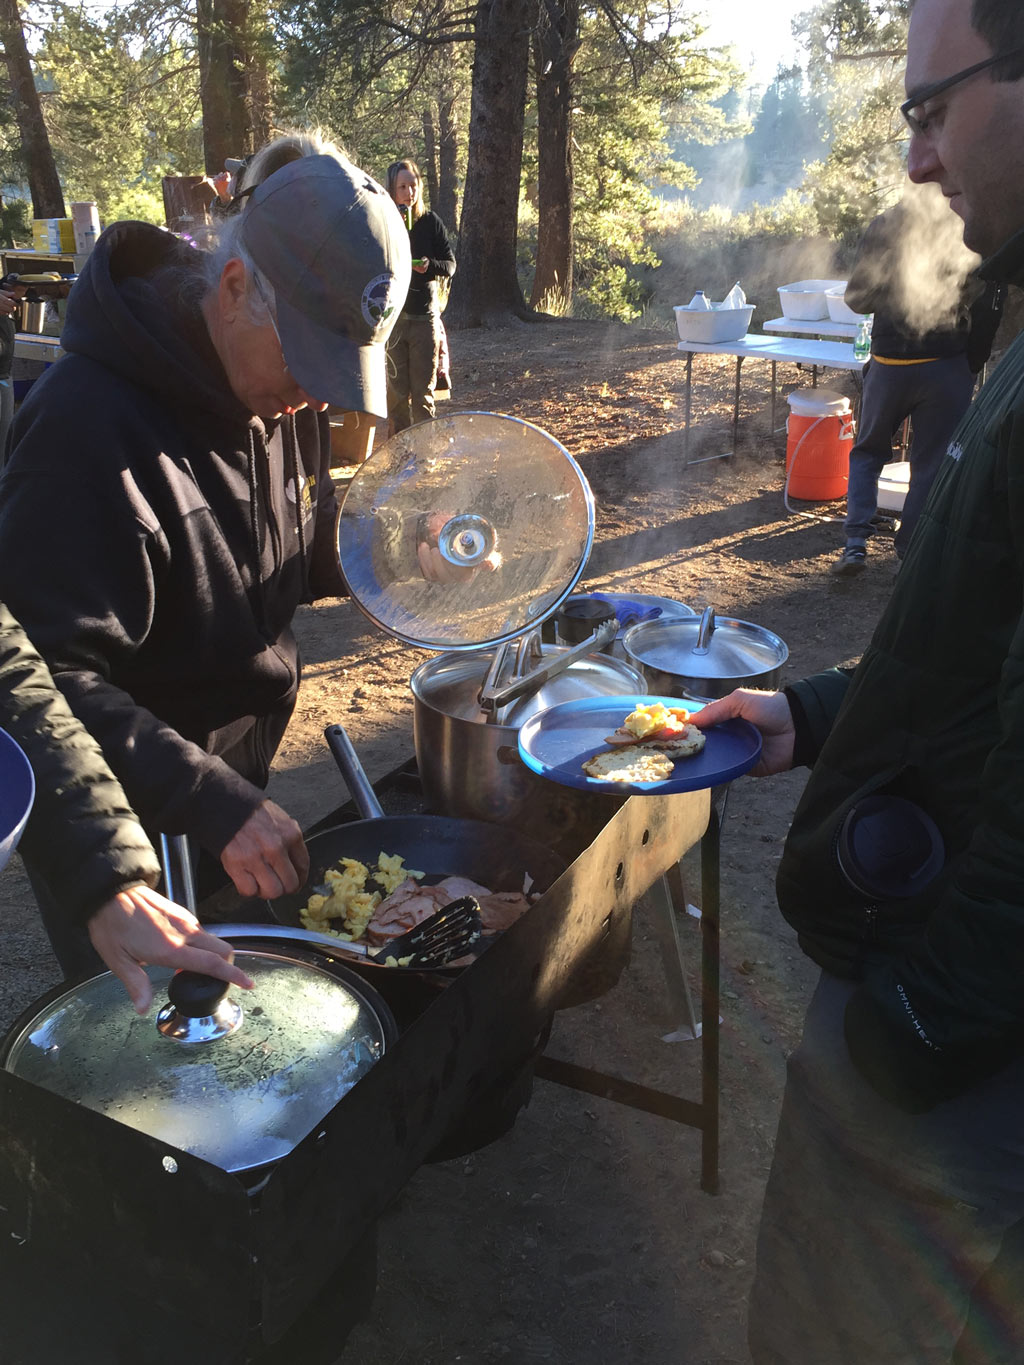 A good camp cooking breakfast gets us started.